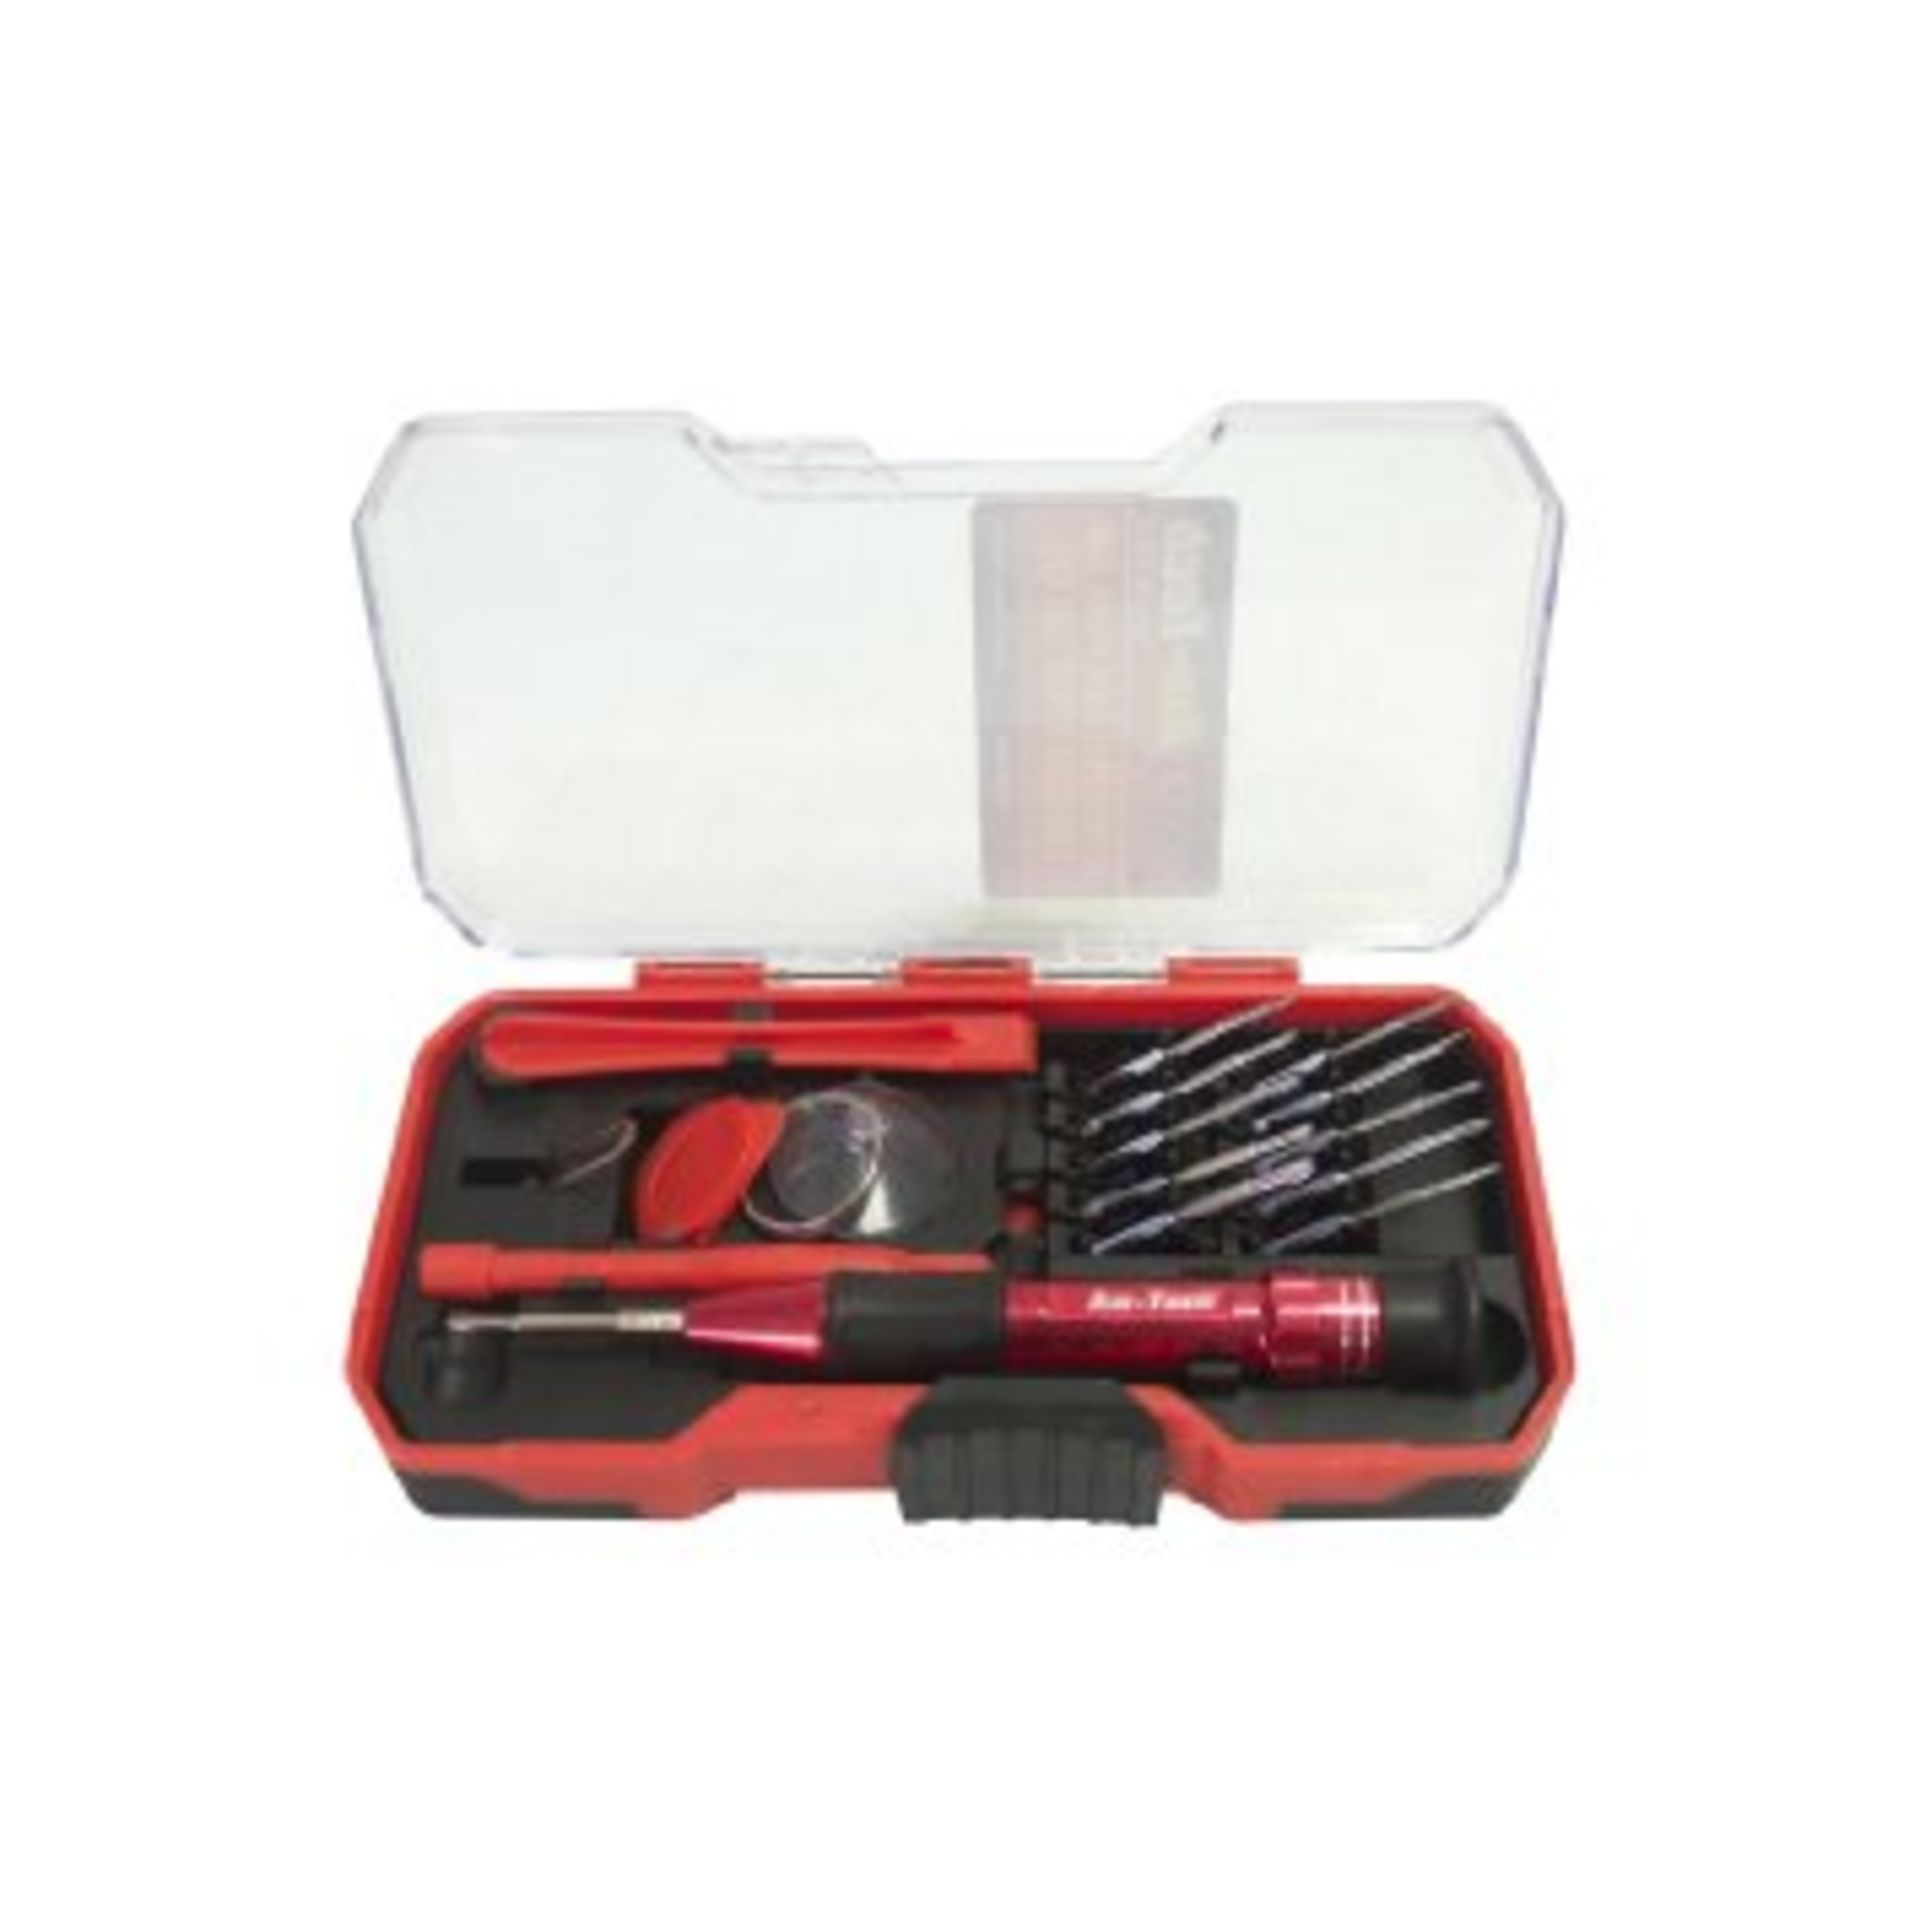 V Brand New 17pc Precision Phone & Computer Repair Tool Set X 2 Bid price to be multiplied by Two